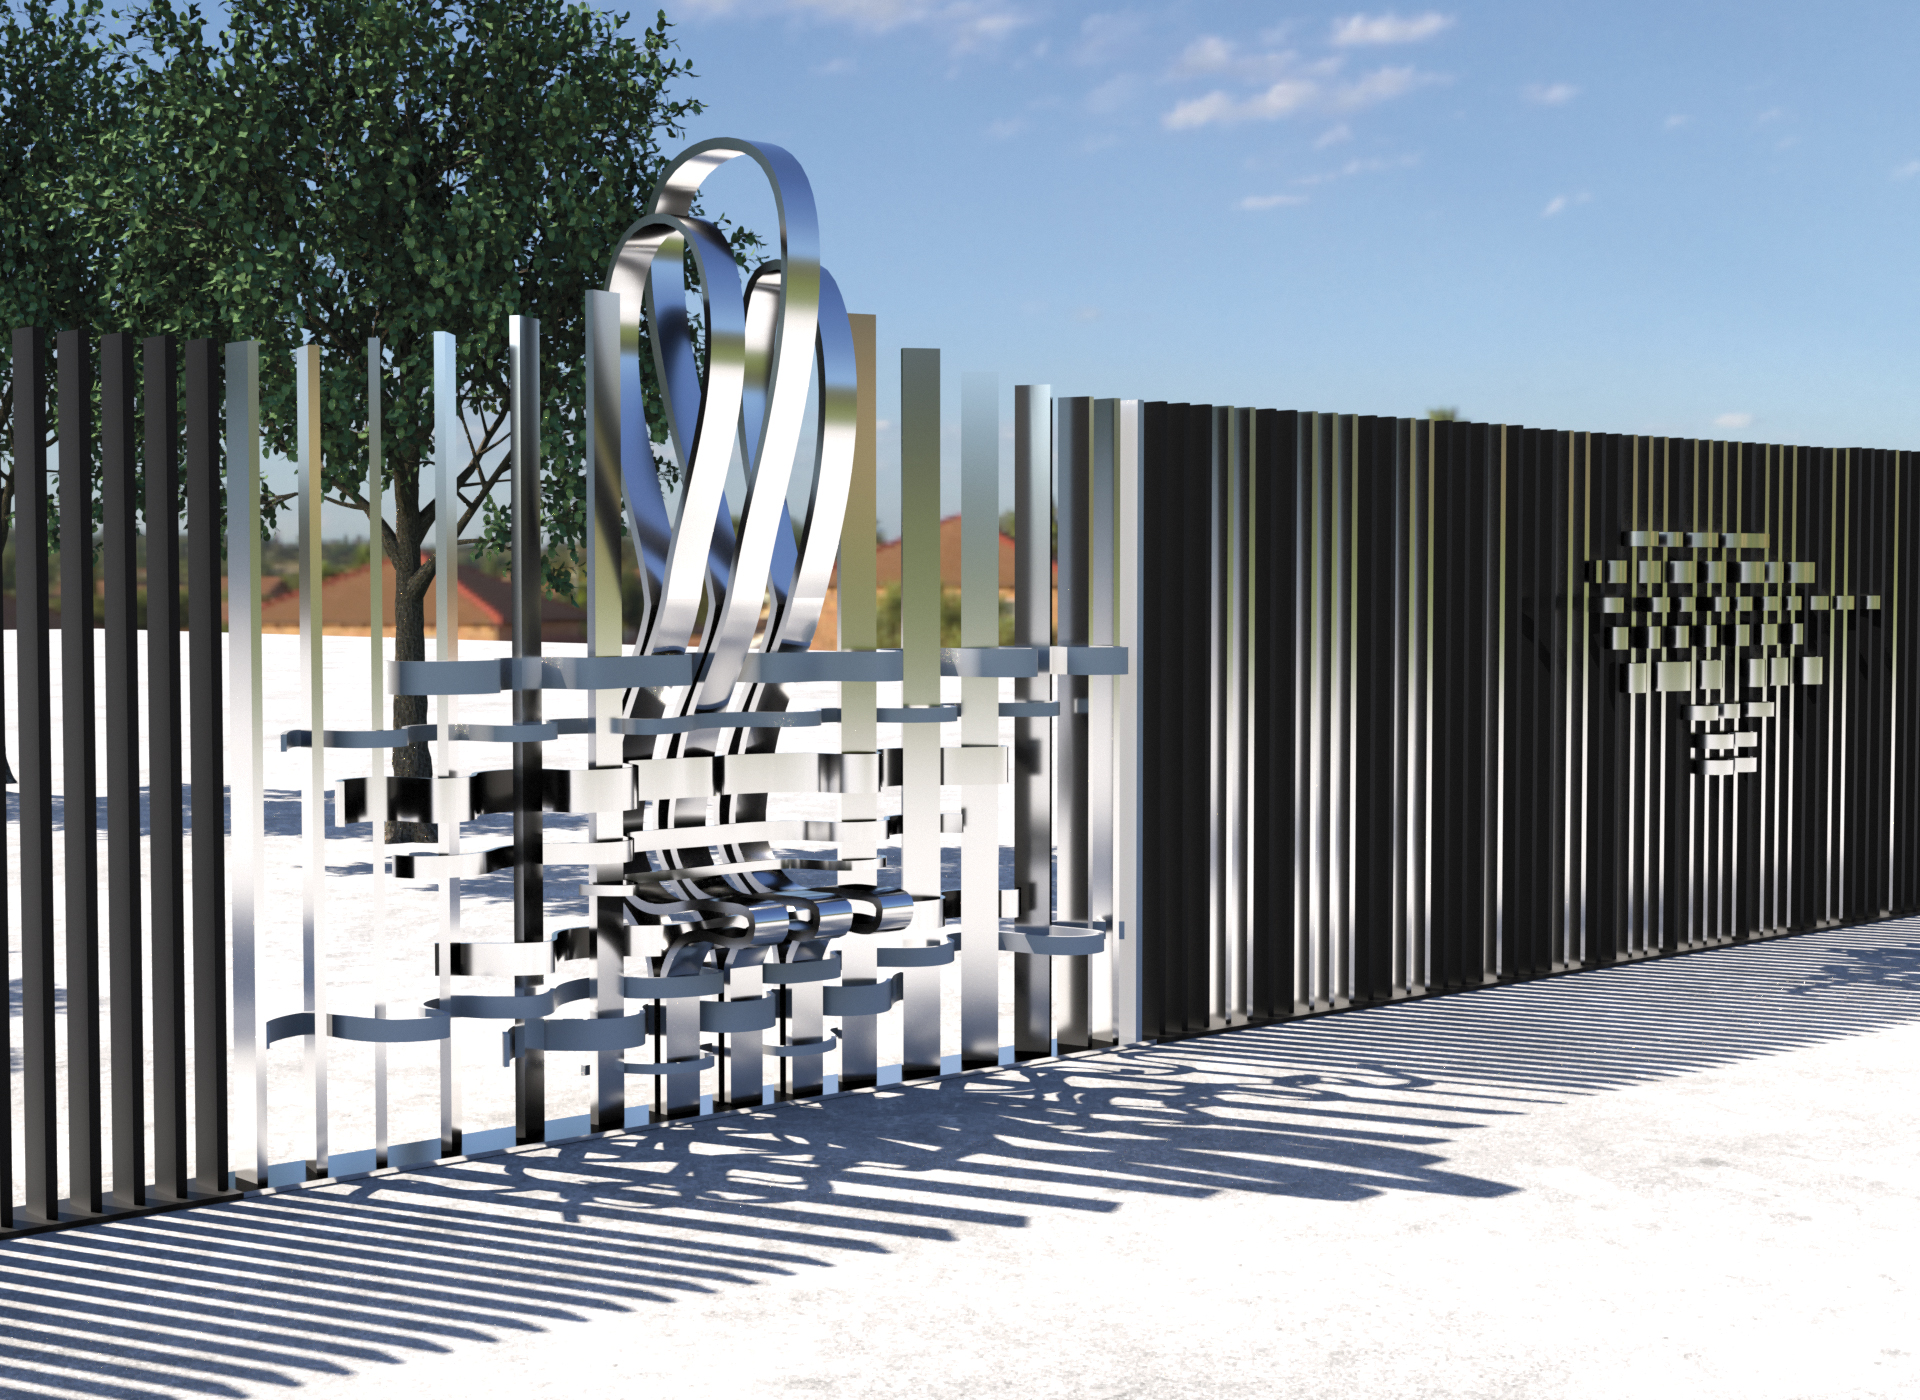 Slatted fence with woven reflective metal insertion that extends out in the center to form seats